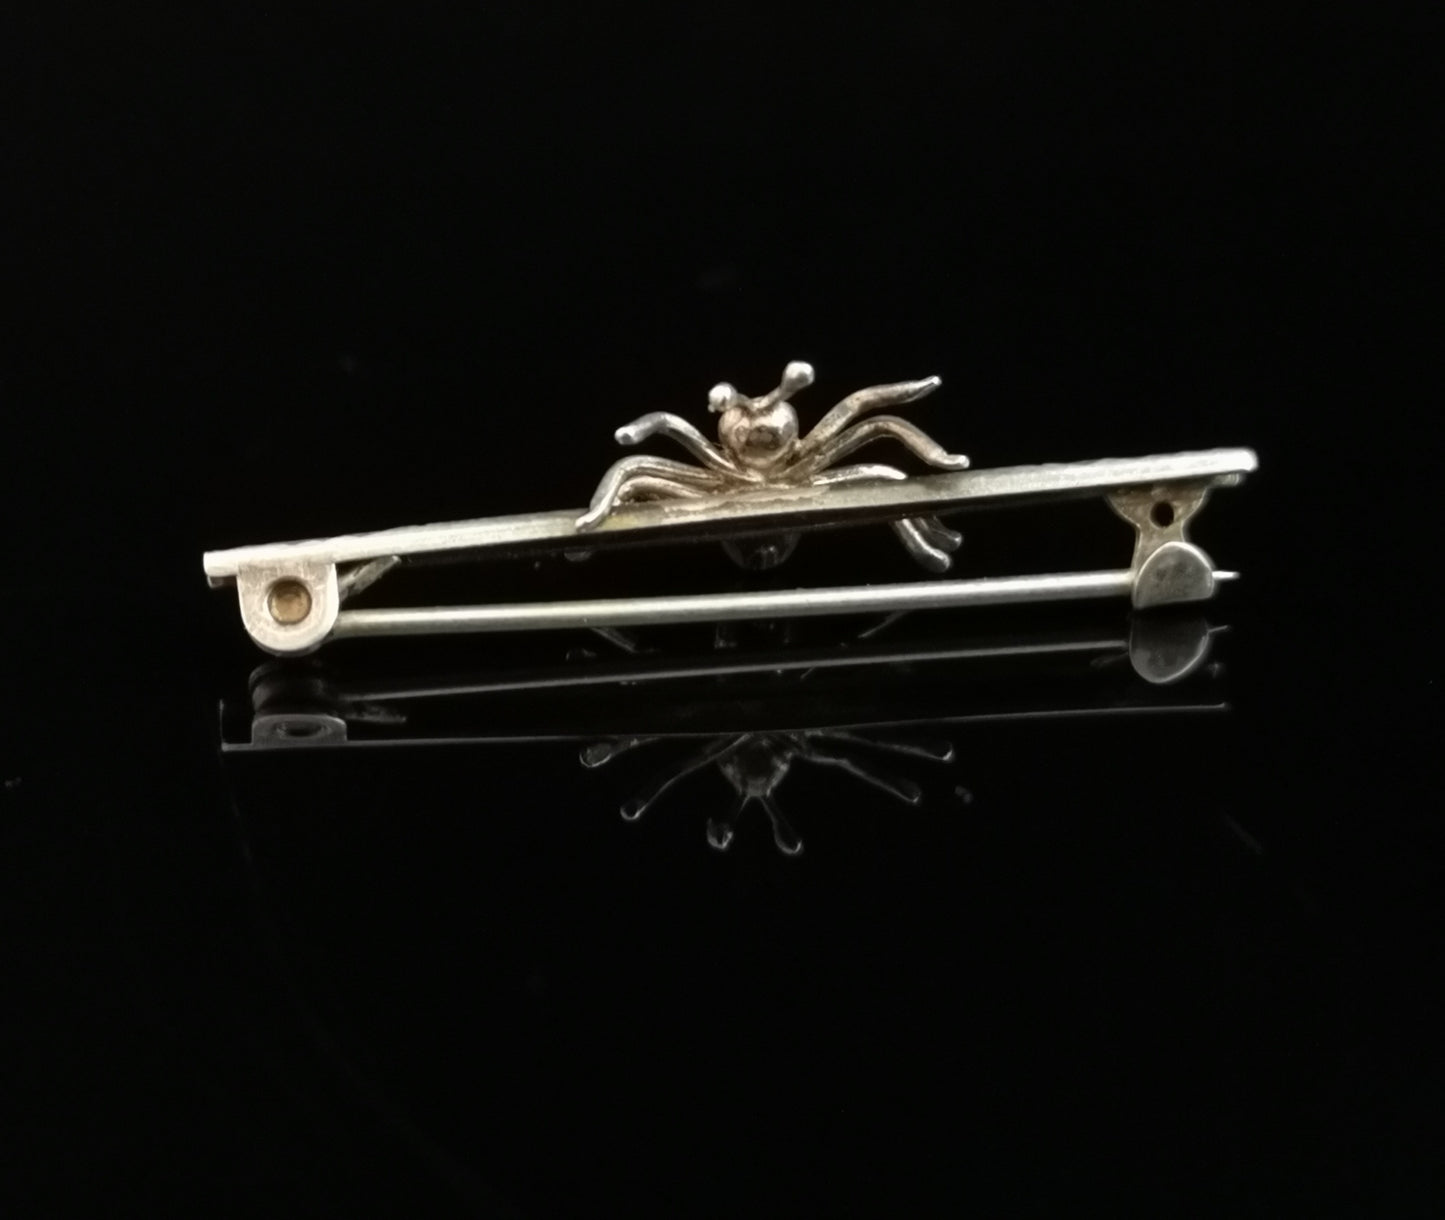 Antique Victorian spider brooch, silver and paste